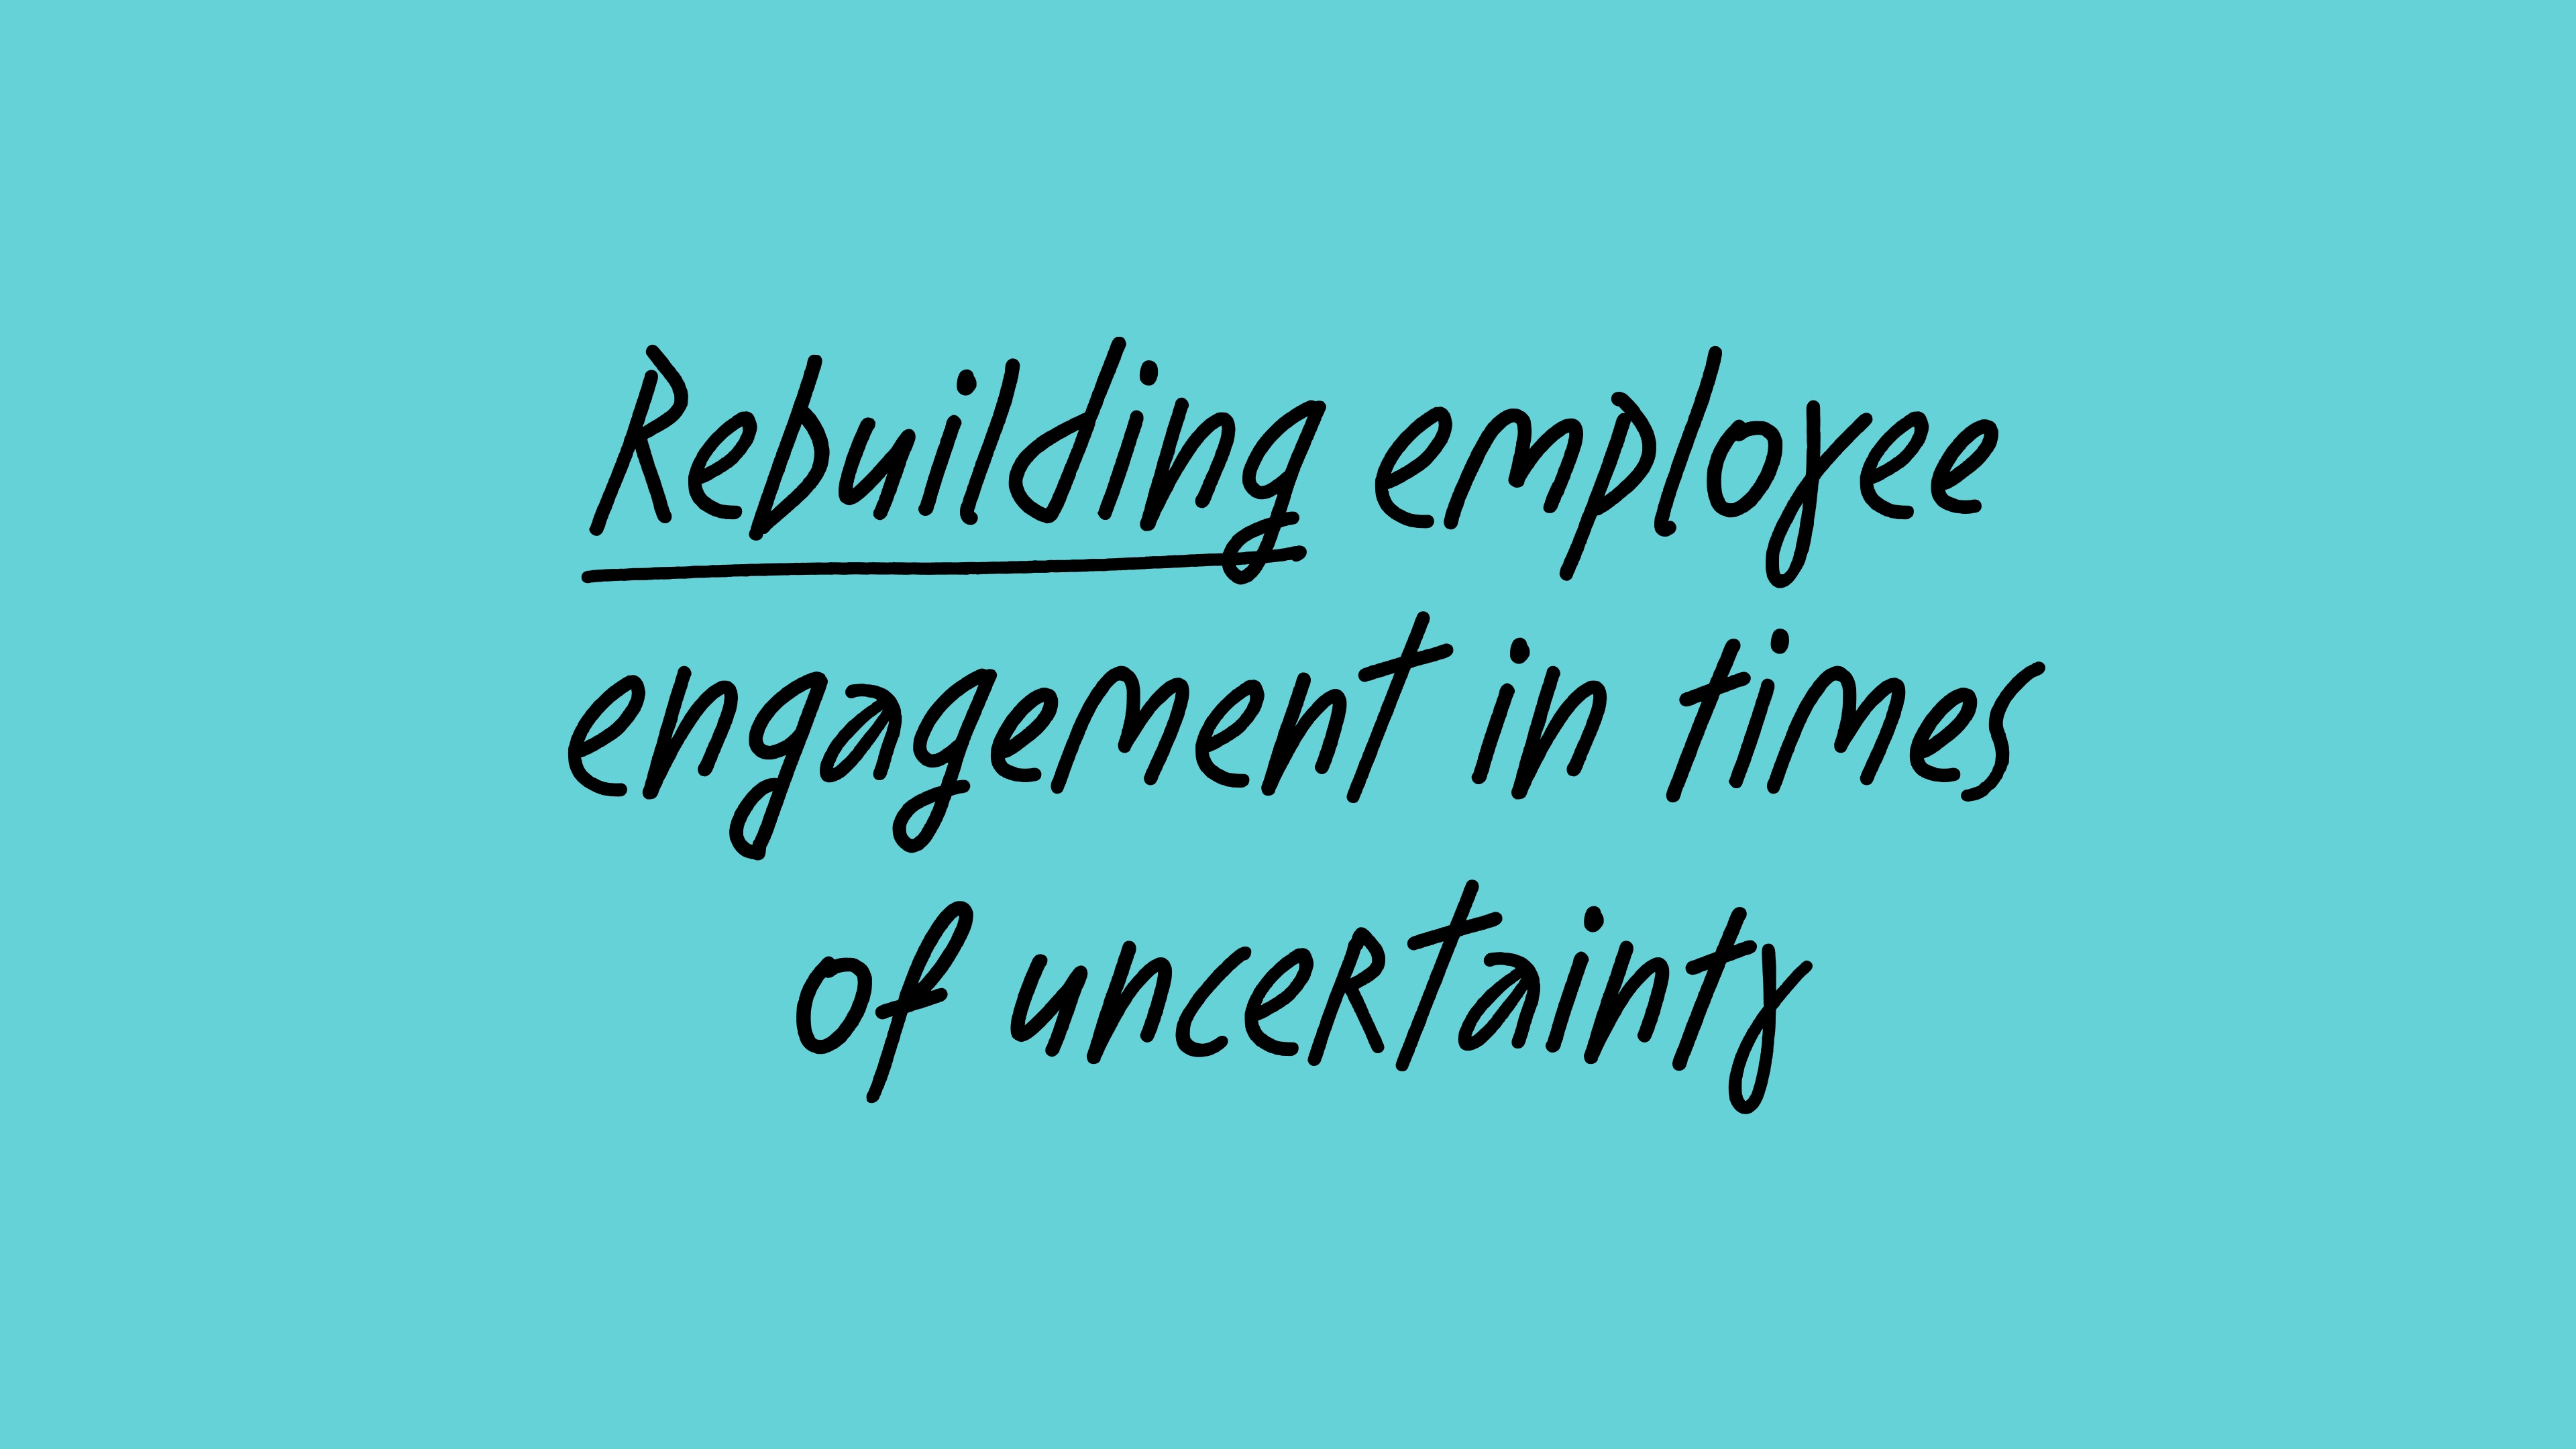 Rebuilding employee engagement in times of uncertainty